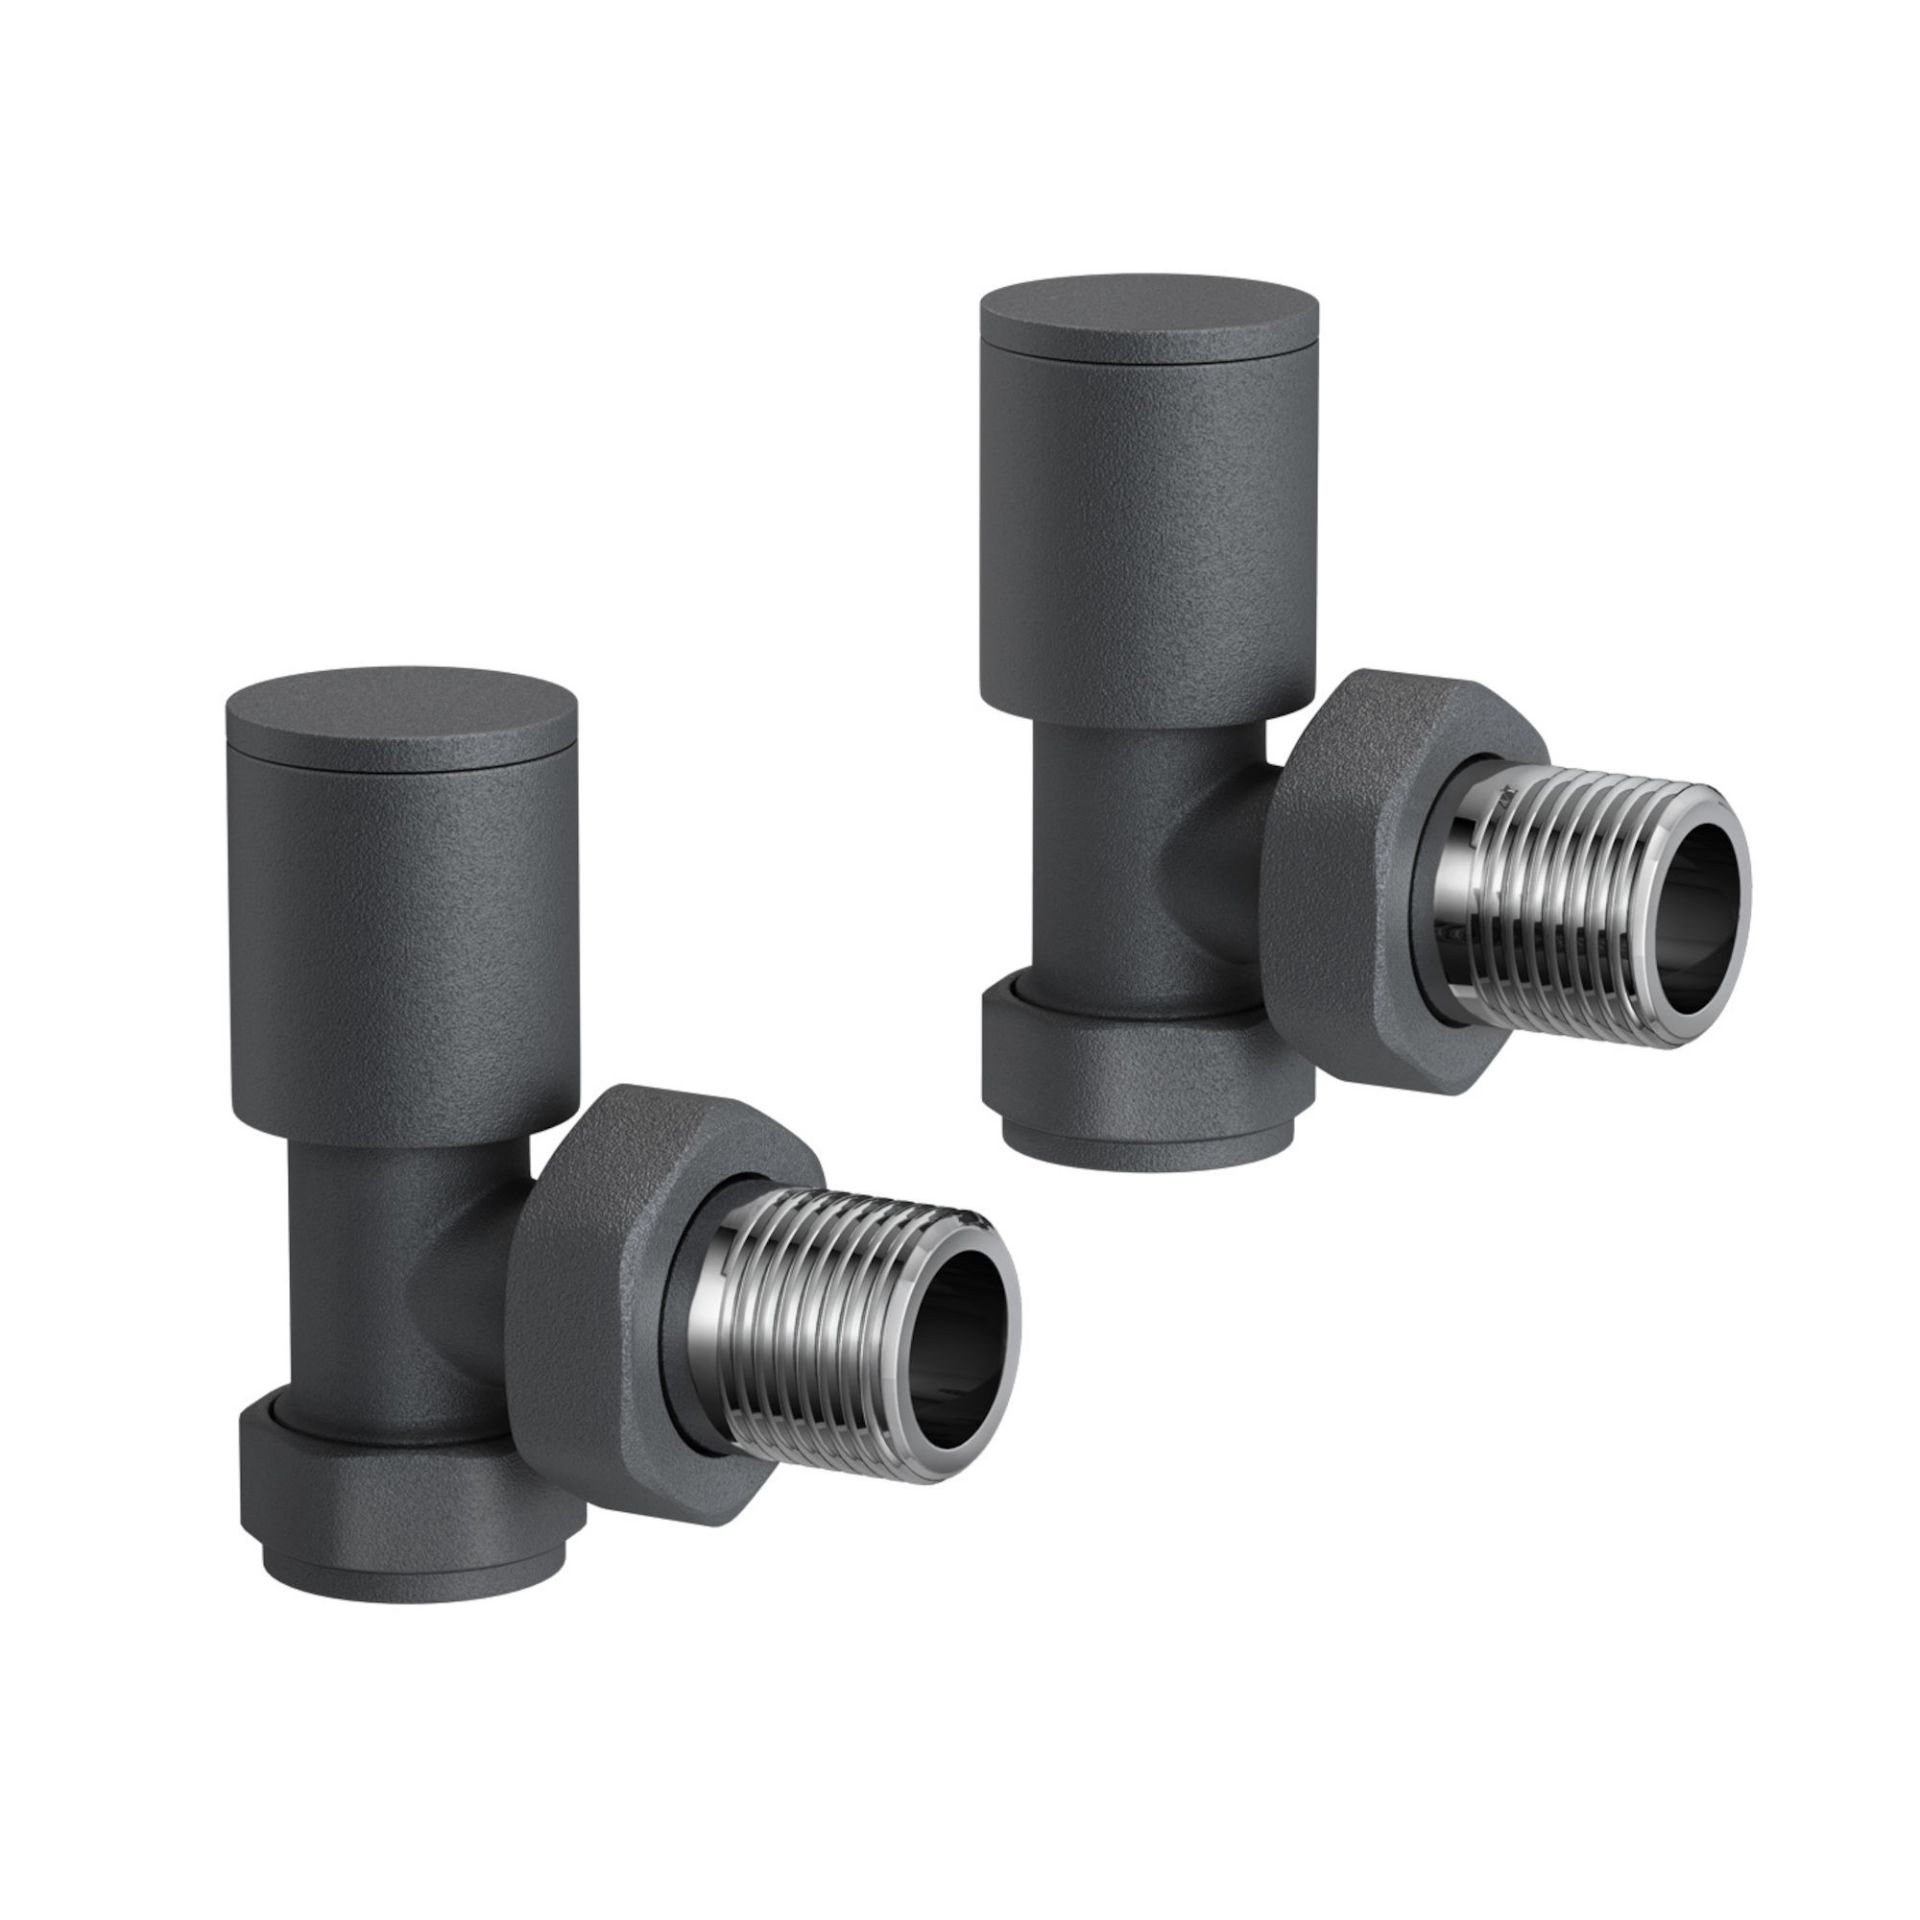 (NF130) Anthracite Standard Connection Angled Radiator Valves 15mm Contemporary anthracite finish